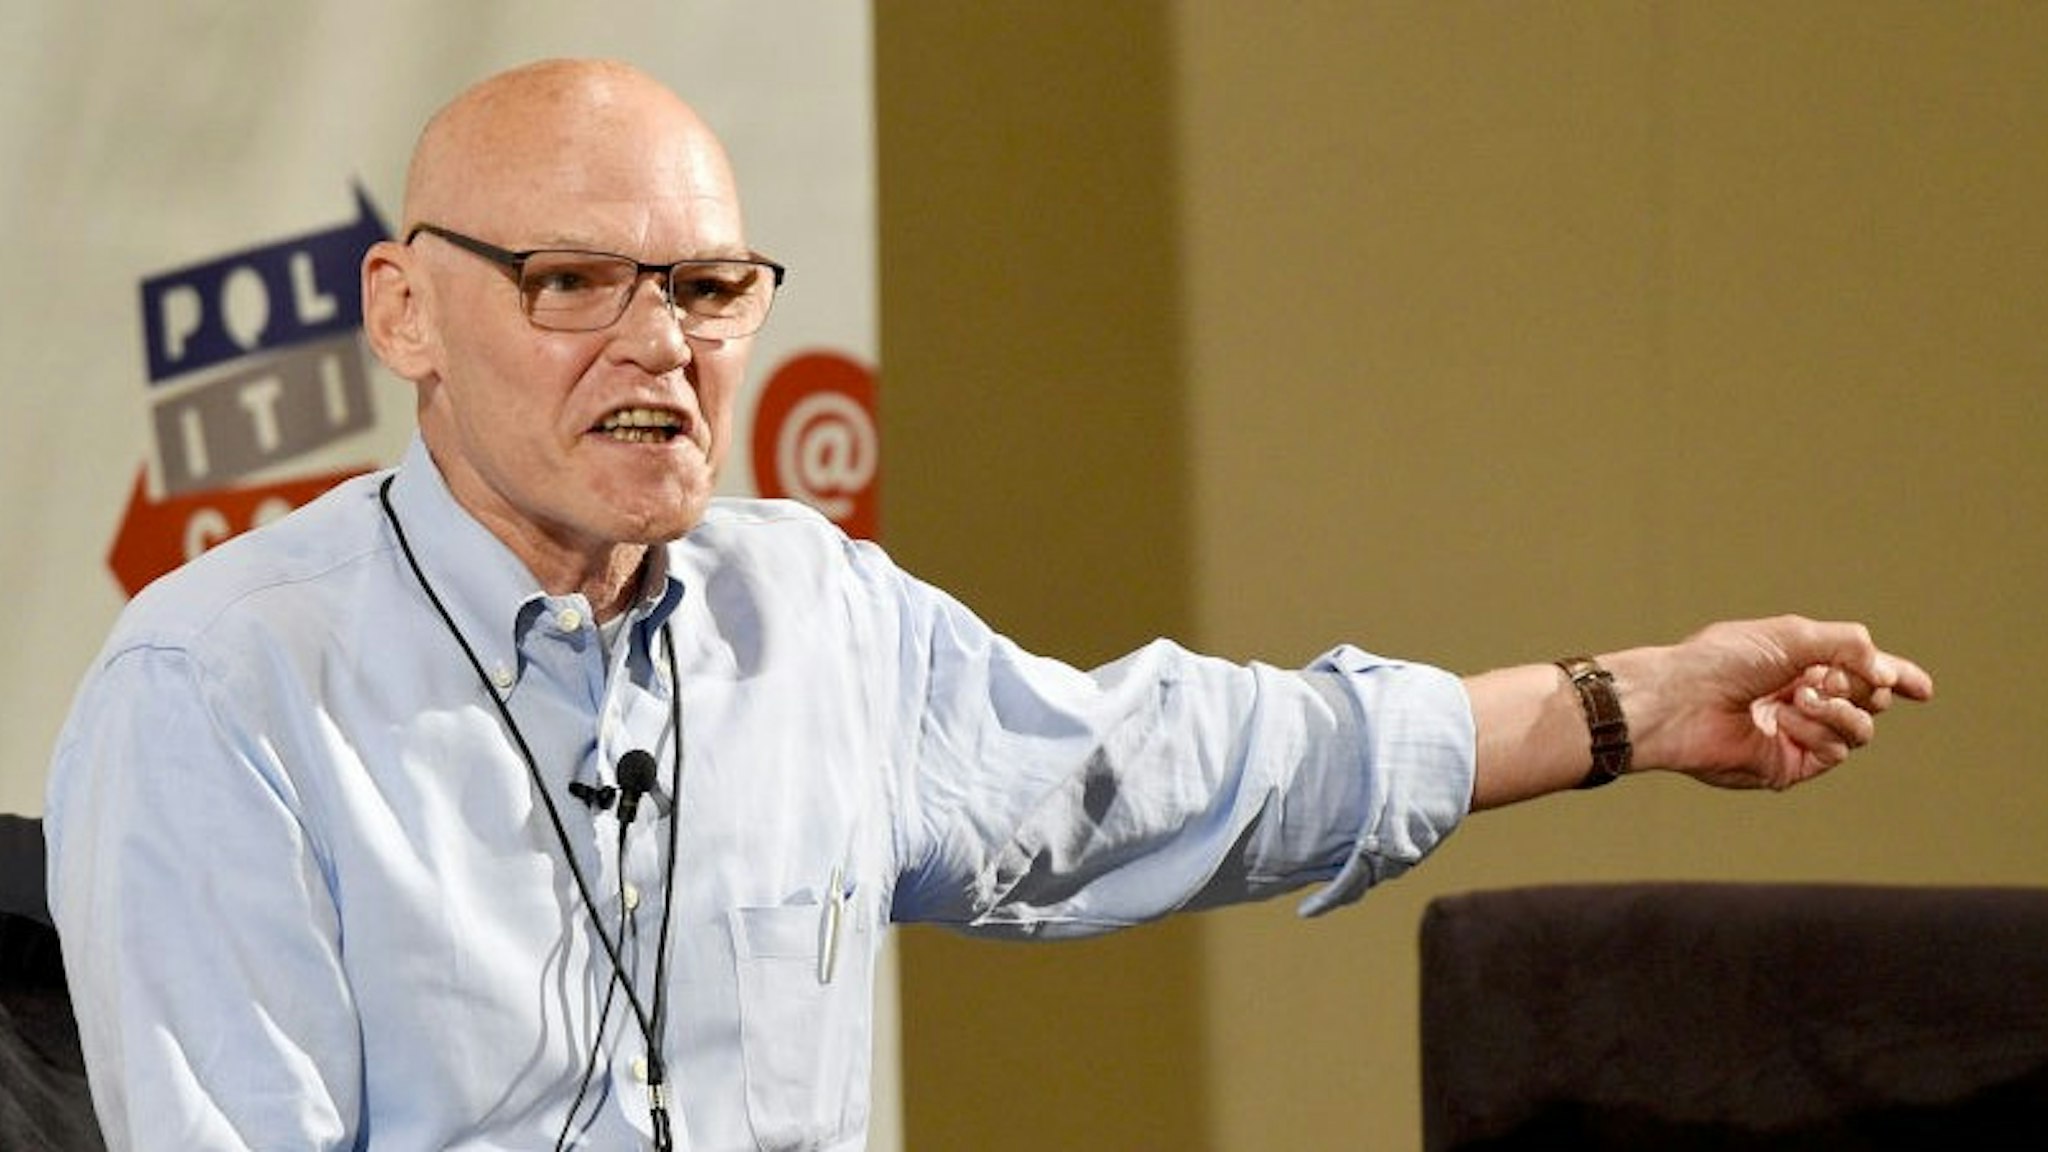 PASADENA, CA - JULY 29: James Carville at 'Art of the Campaign Strategy' panel during Politicon at Pasadena Convention Center on July 29, 2017 in Pasadena, California. (Photo by